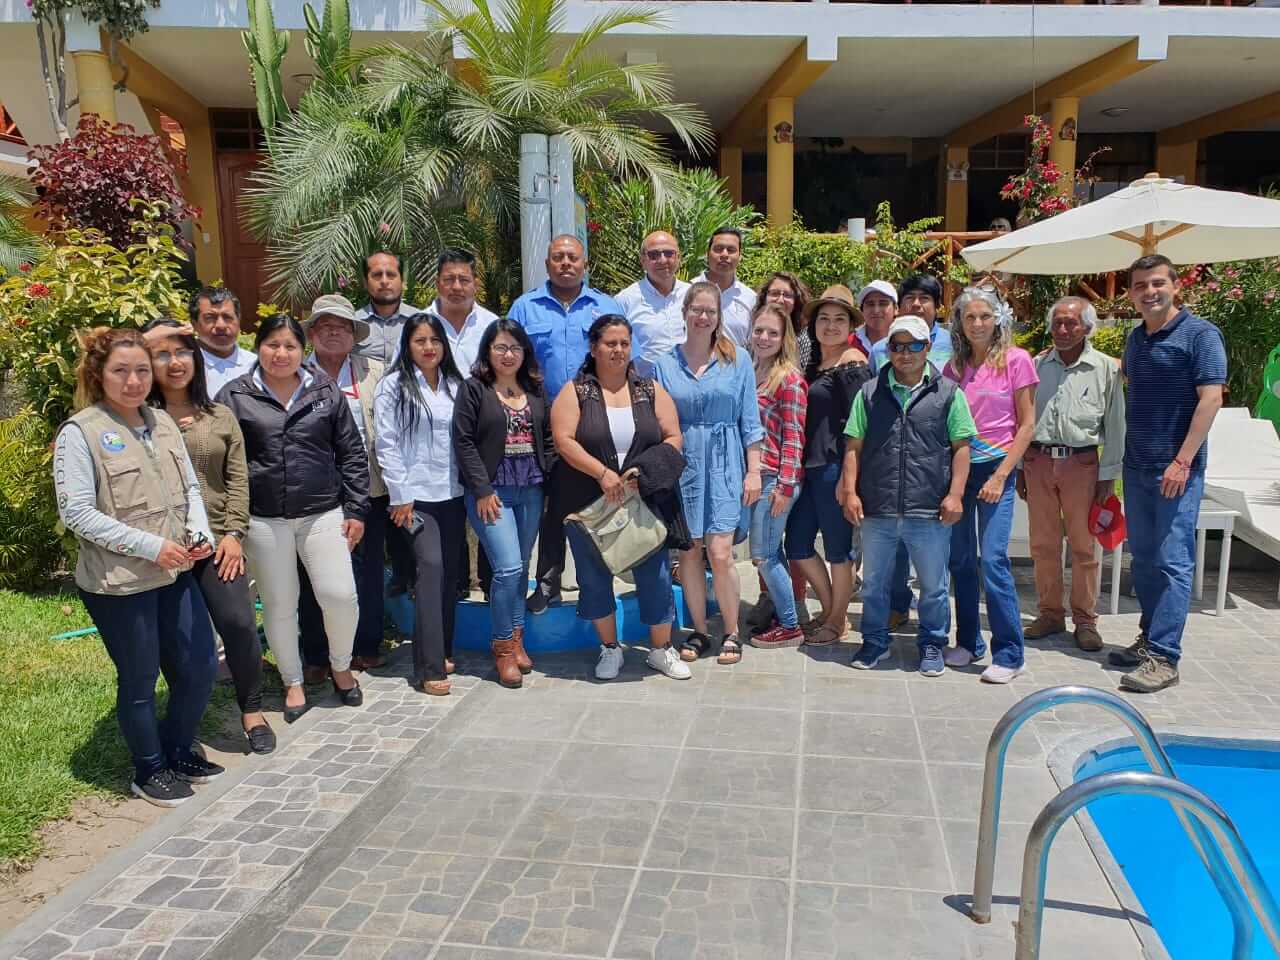 The RESPONSible Travel Peru team giving a workshop about sustainable tourism in Paracas, Peru